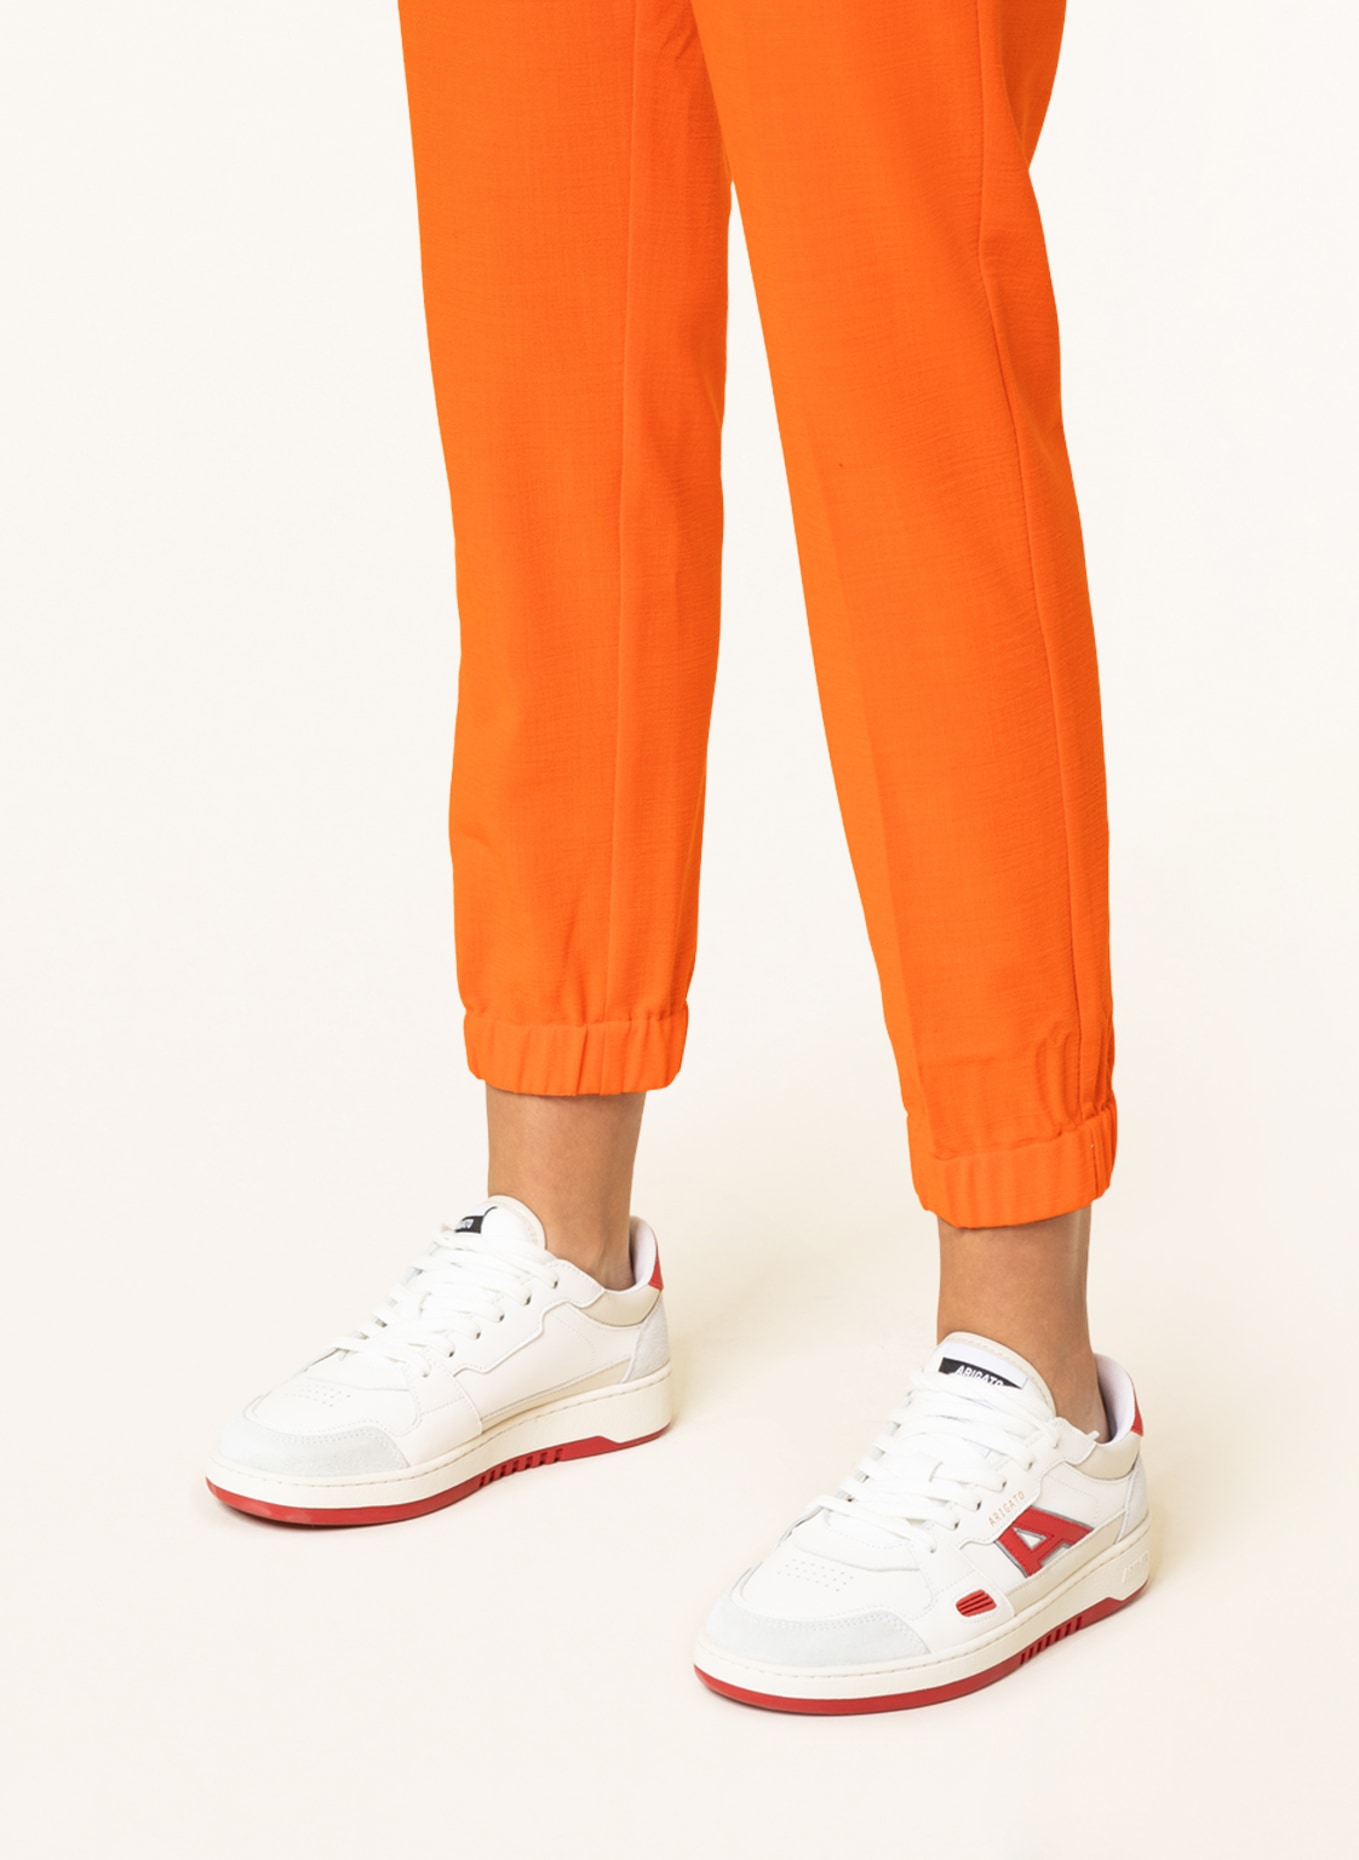 rich&royal Pants in jogger style , Color: ORANGE (Image 5)